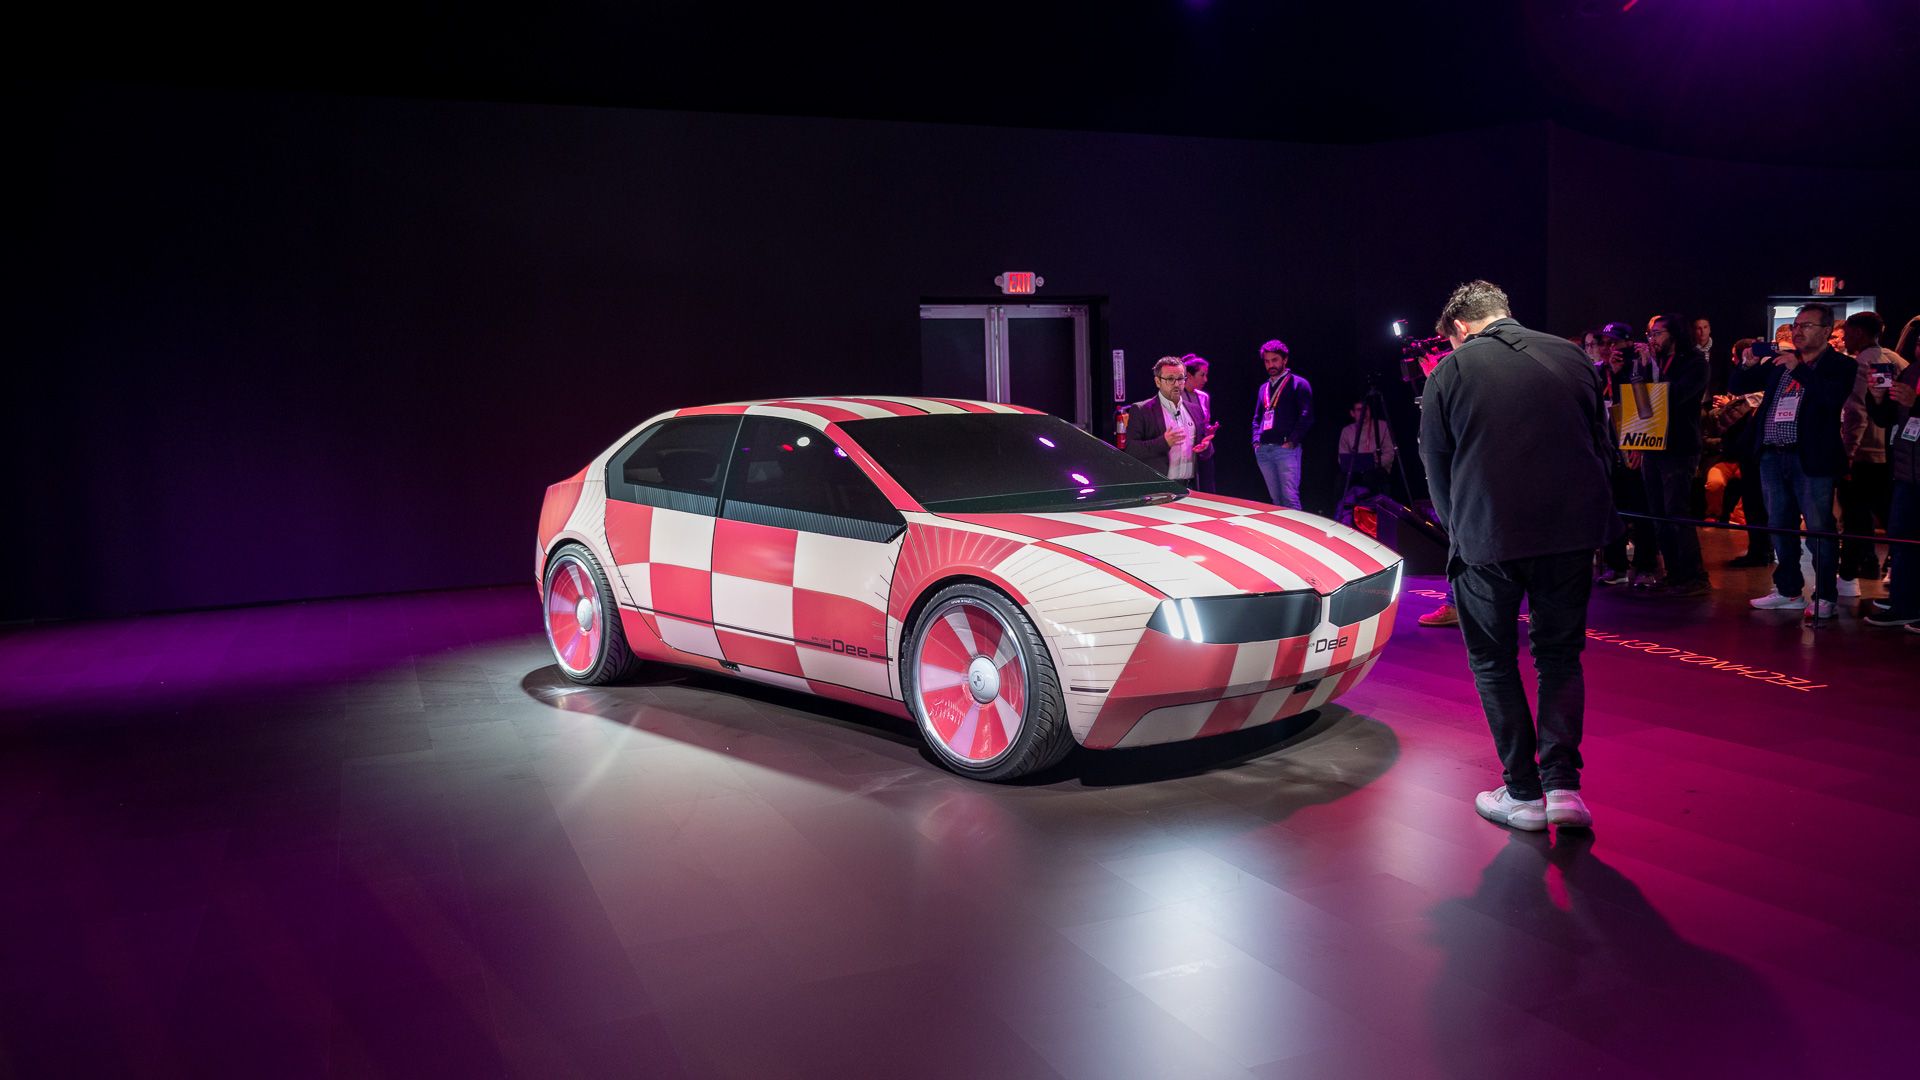 The BMW i Dee Vision with a pink and white checkerboard pattern at CES 2023.